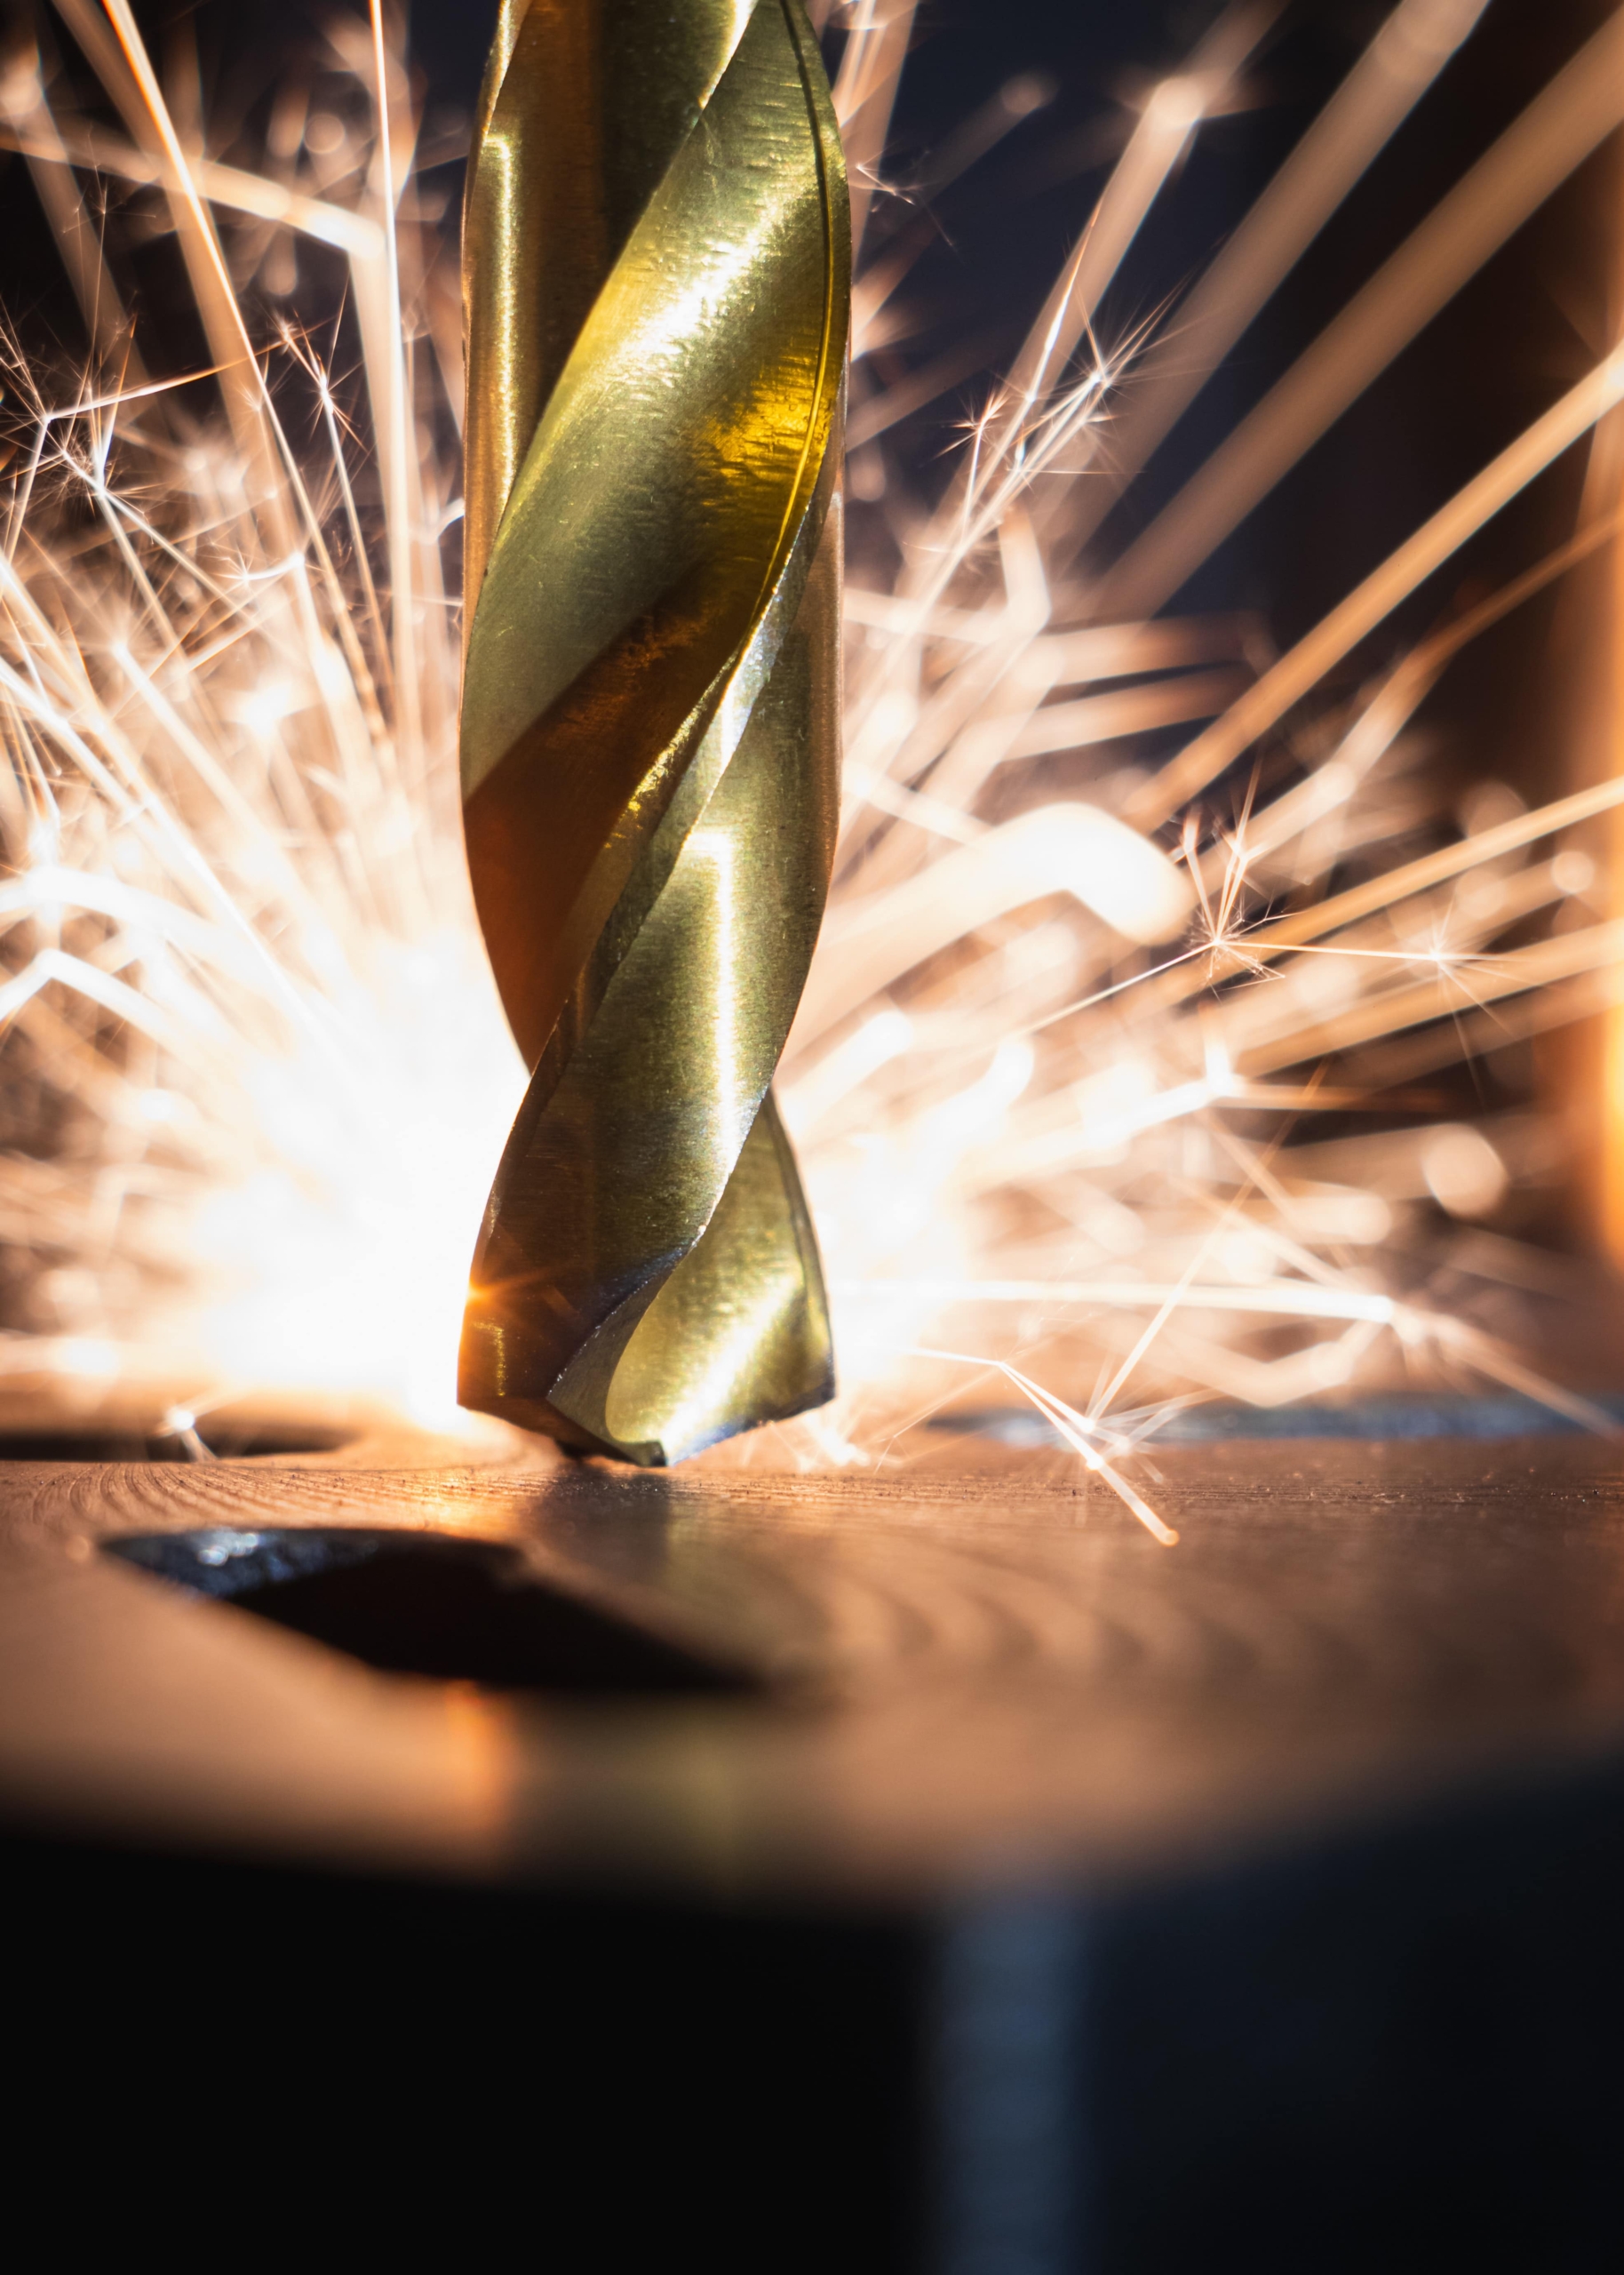 A gold spiral drill bit touches a metal board and sparks fly around it